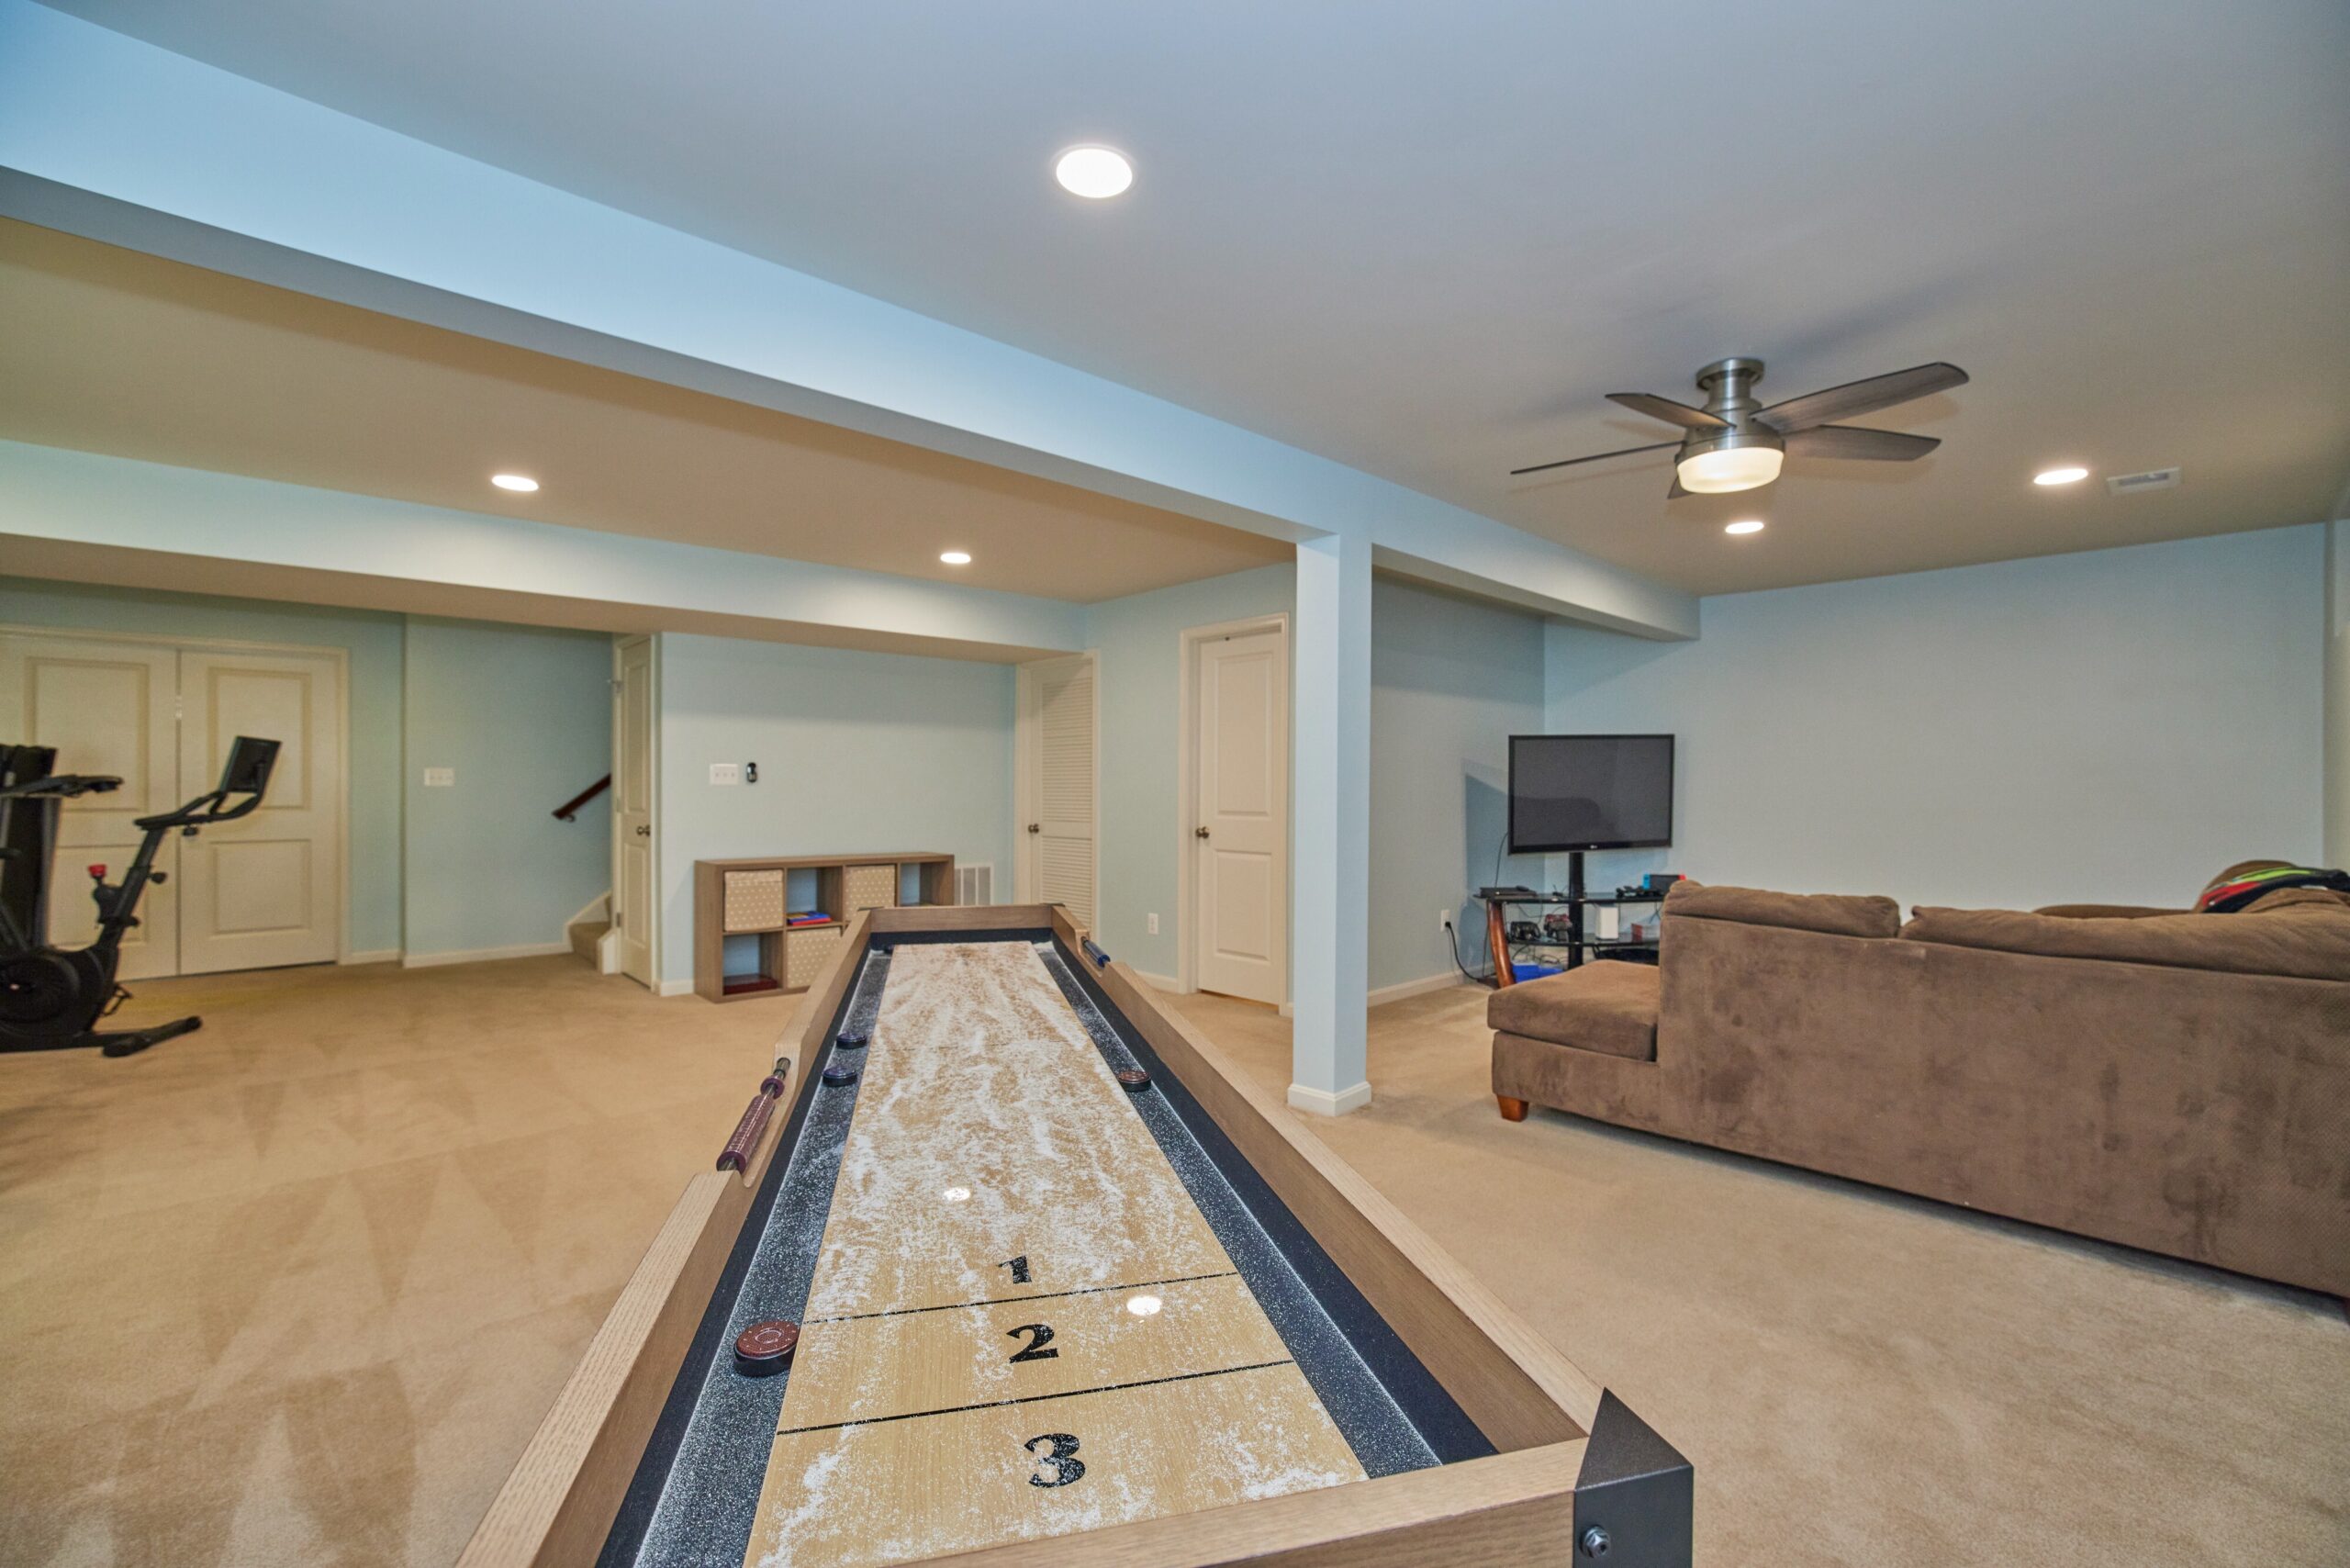 Professional interior photo of 12030 Lake Dorian Drive, Bristow, VA - showing the basement with cream carpeting, light blue walls and furniture with a shuffleboard table